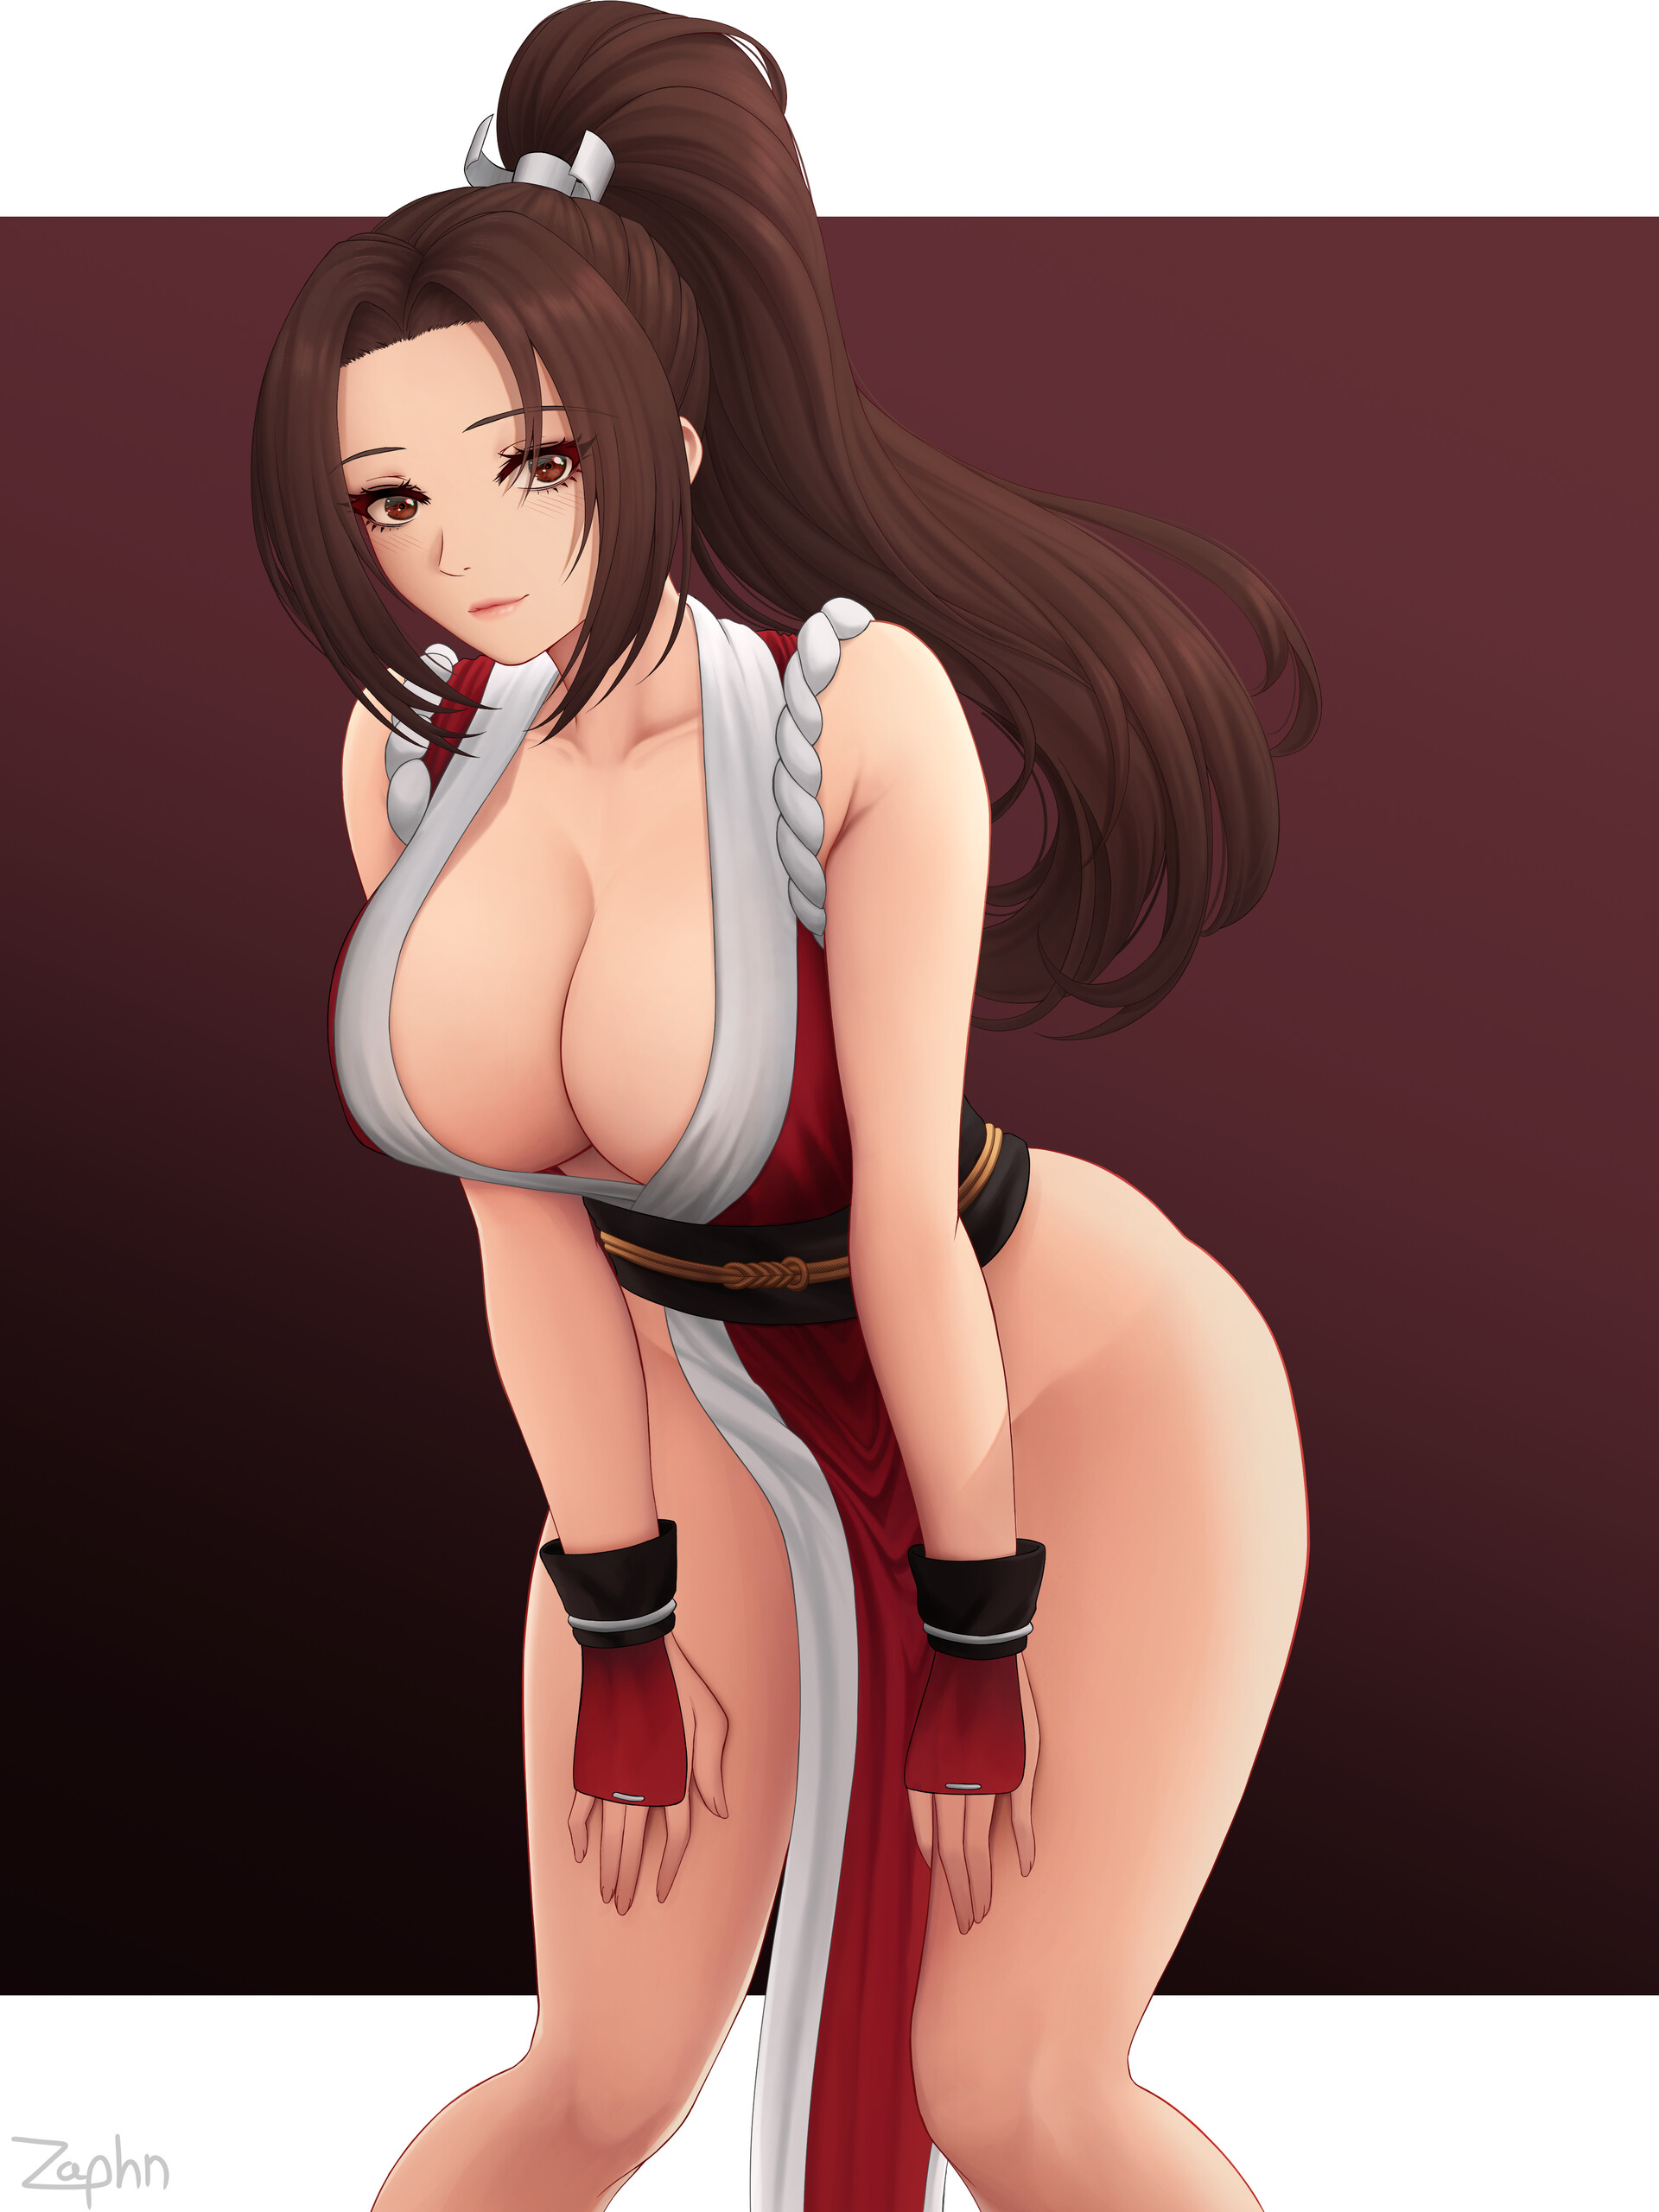 Anime 1920x2560 Mai Shiranui Zaphn big boobs cleavage nopan brunette ponytail brown eyes anime girls Fatal Fury King of Fighters